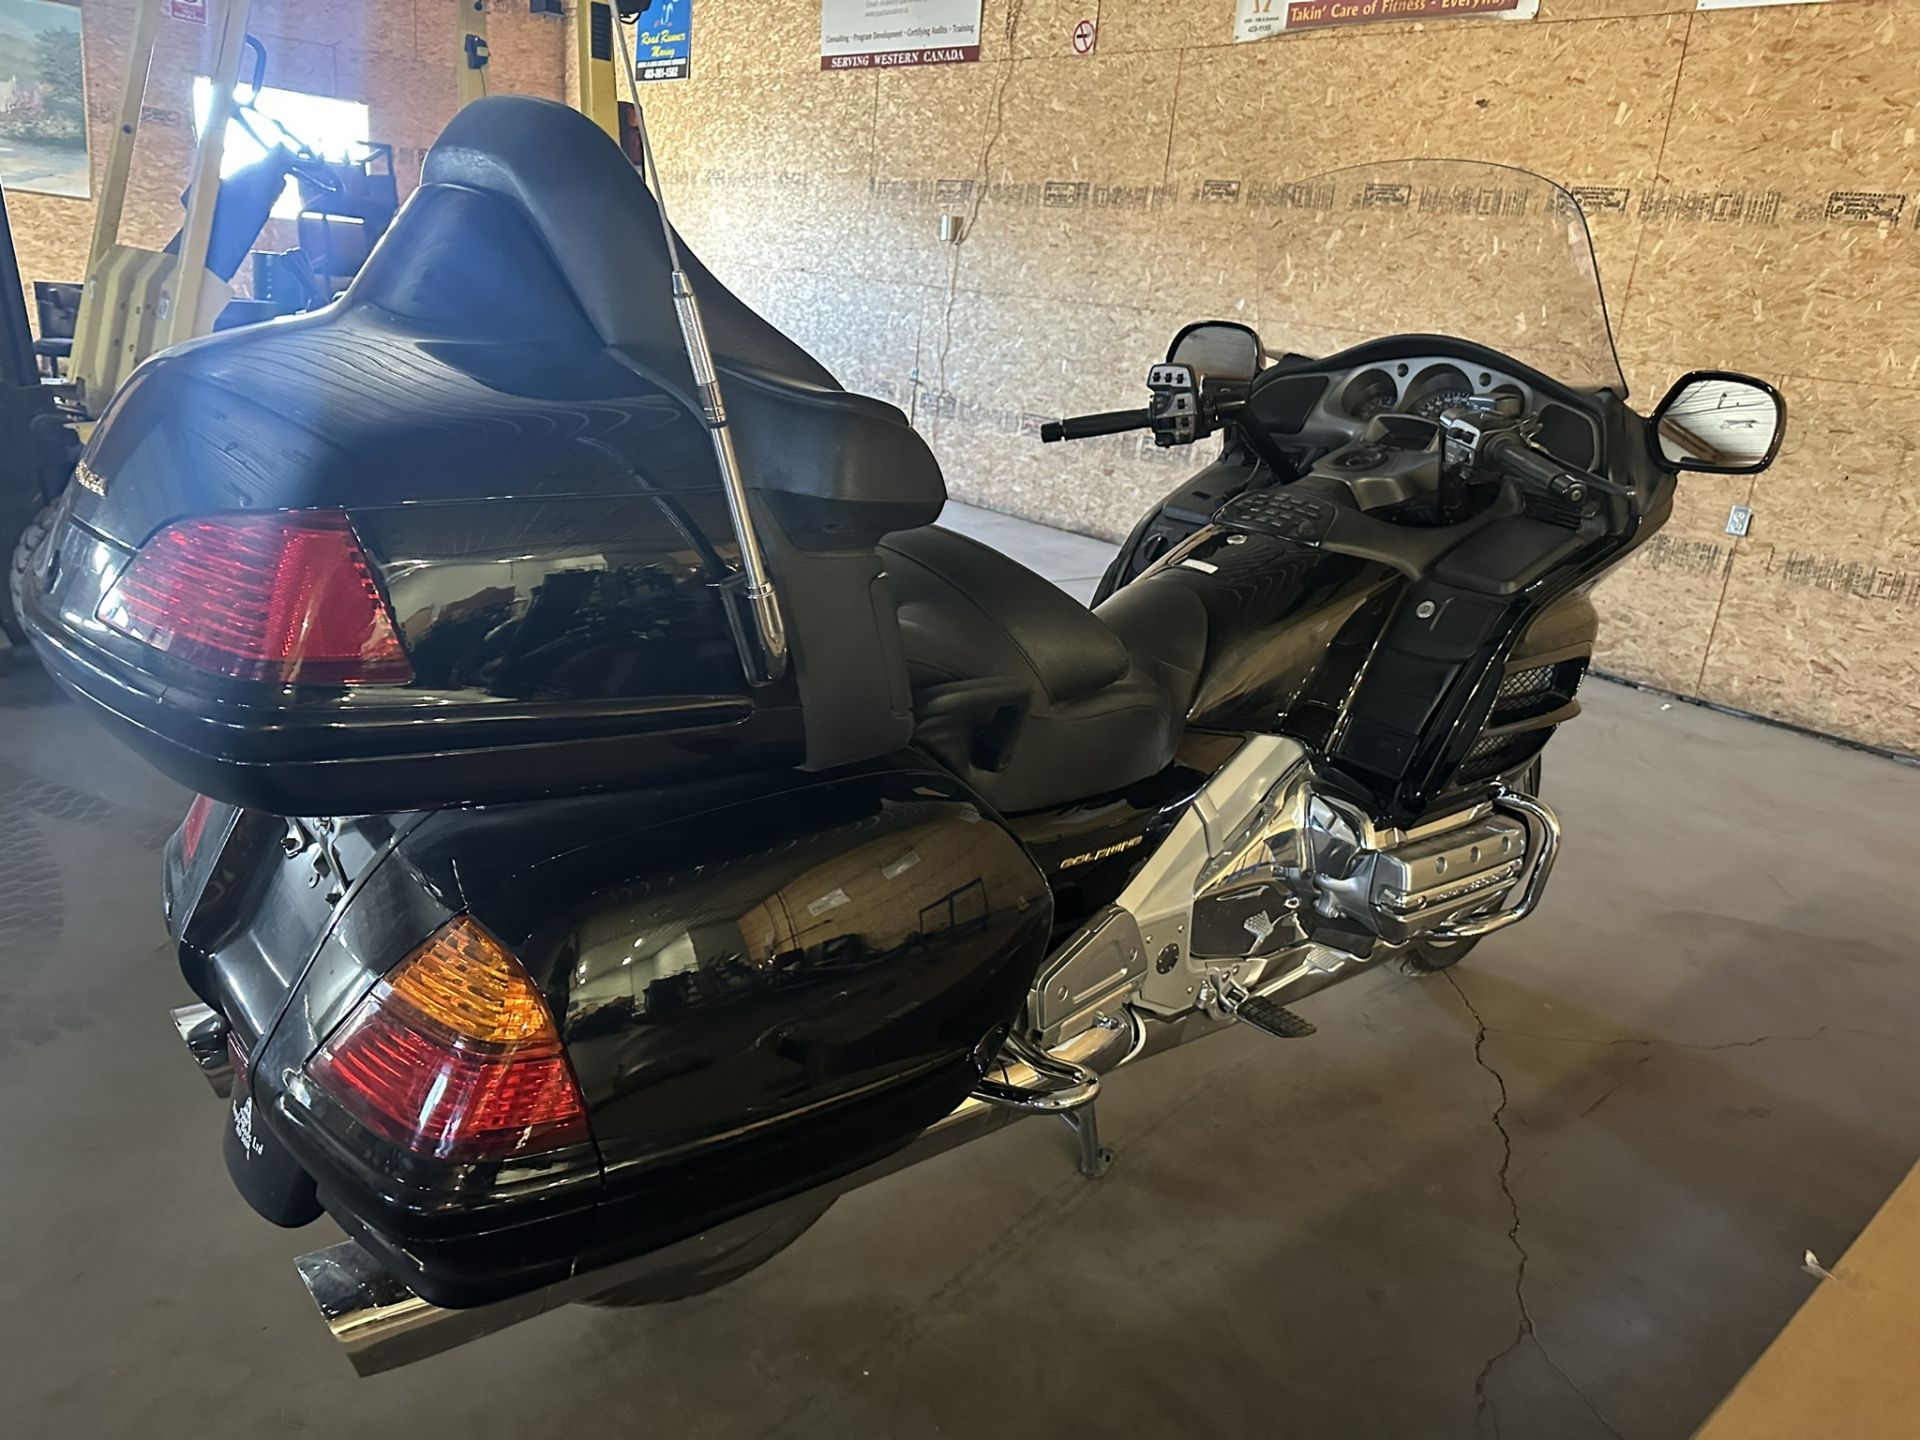 2001 HONDA GOLDWING GL1800A MOTORCYLE 1800CC, 13,352 KM SHOWING, W/ REVERSE, ADJUSTABLE SUSPENSION - Image 8 of 9